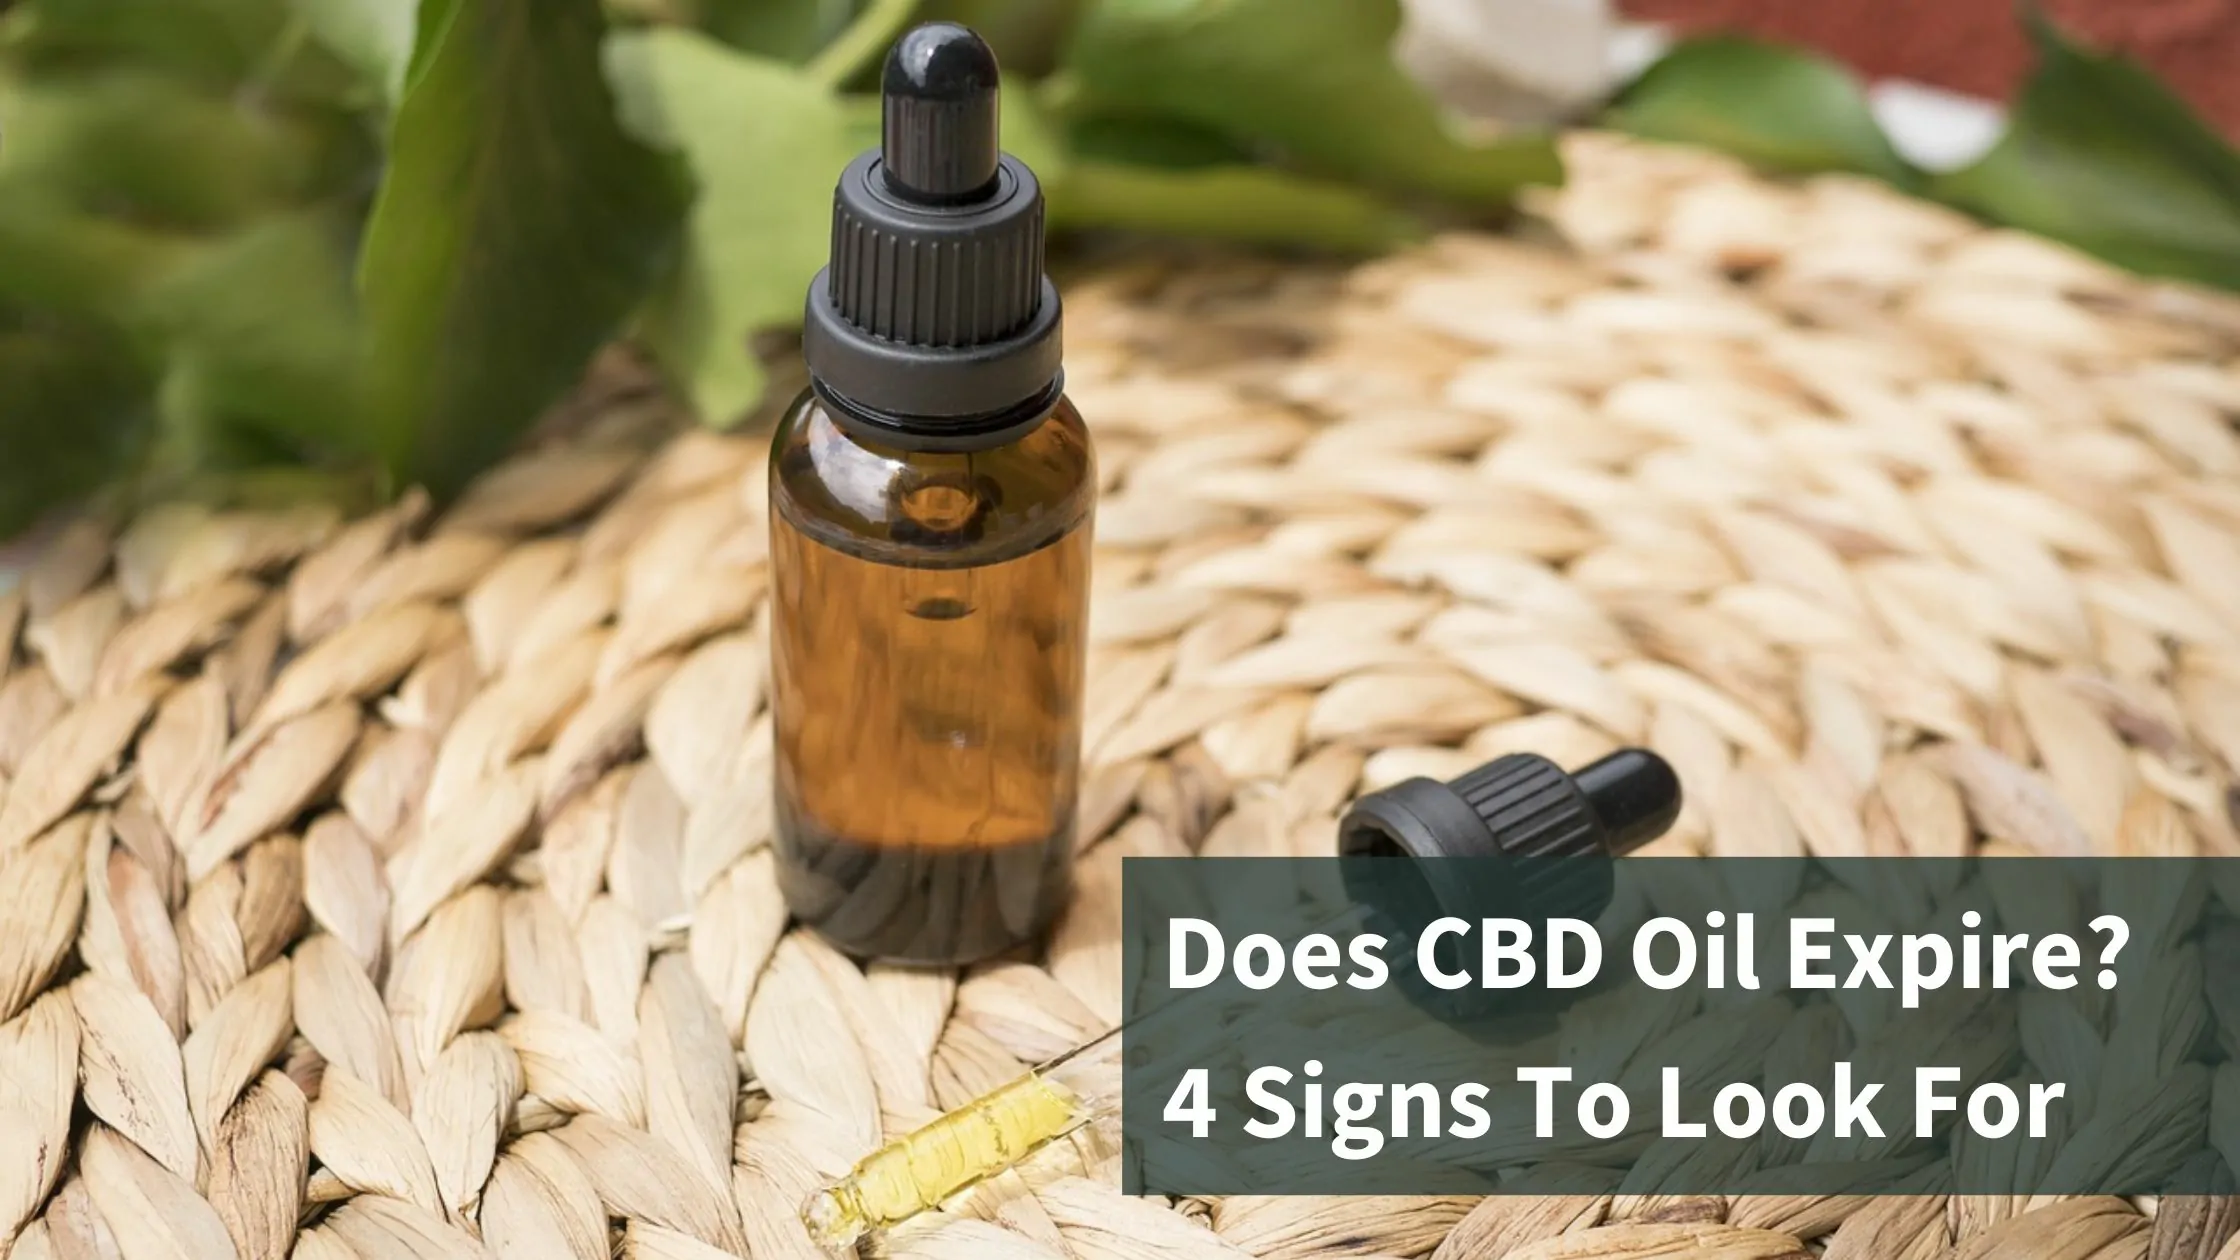 Does CBD Oil Expire? Yes, Here Are 4 Things To Look For